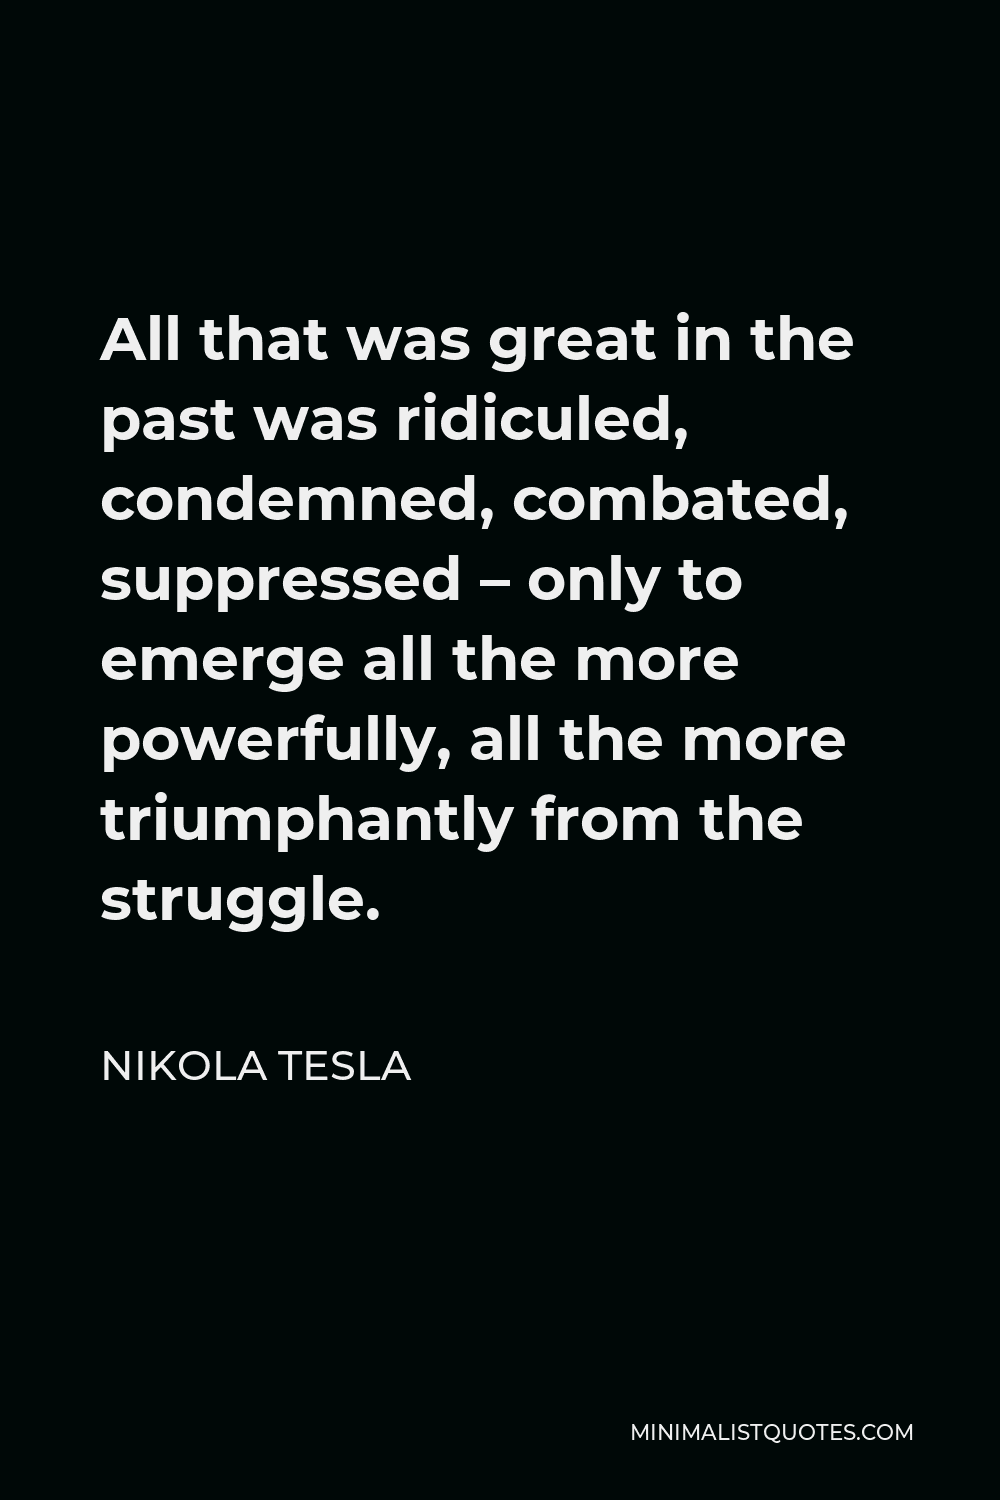 Nikola Tesla Quote - All that was great in the past was ridiculed, condemned, combated, suppressed – only to emerge all the more powerfully, all the more triumphantly from the struggle.